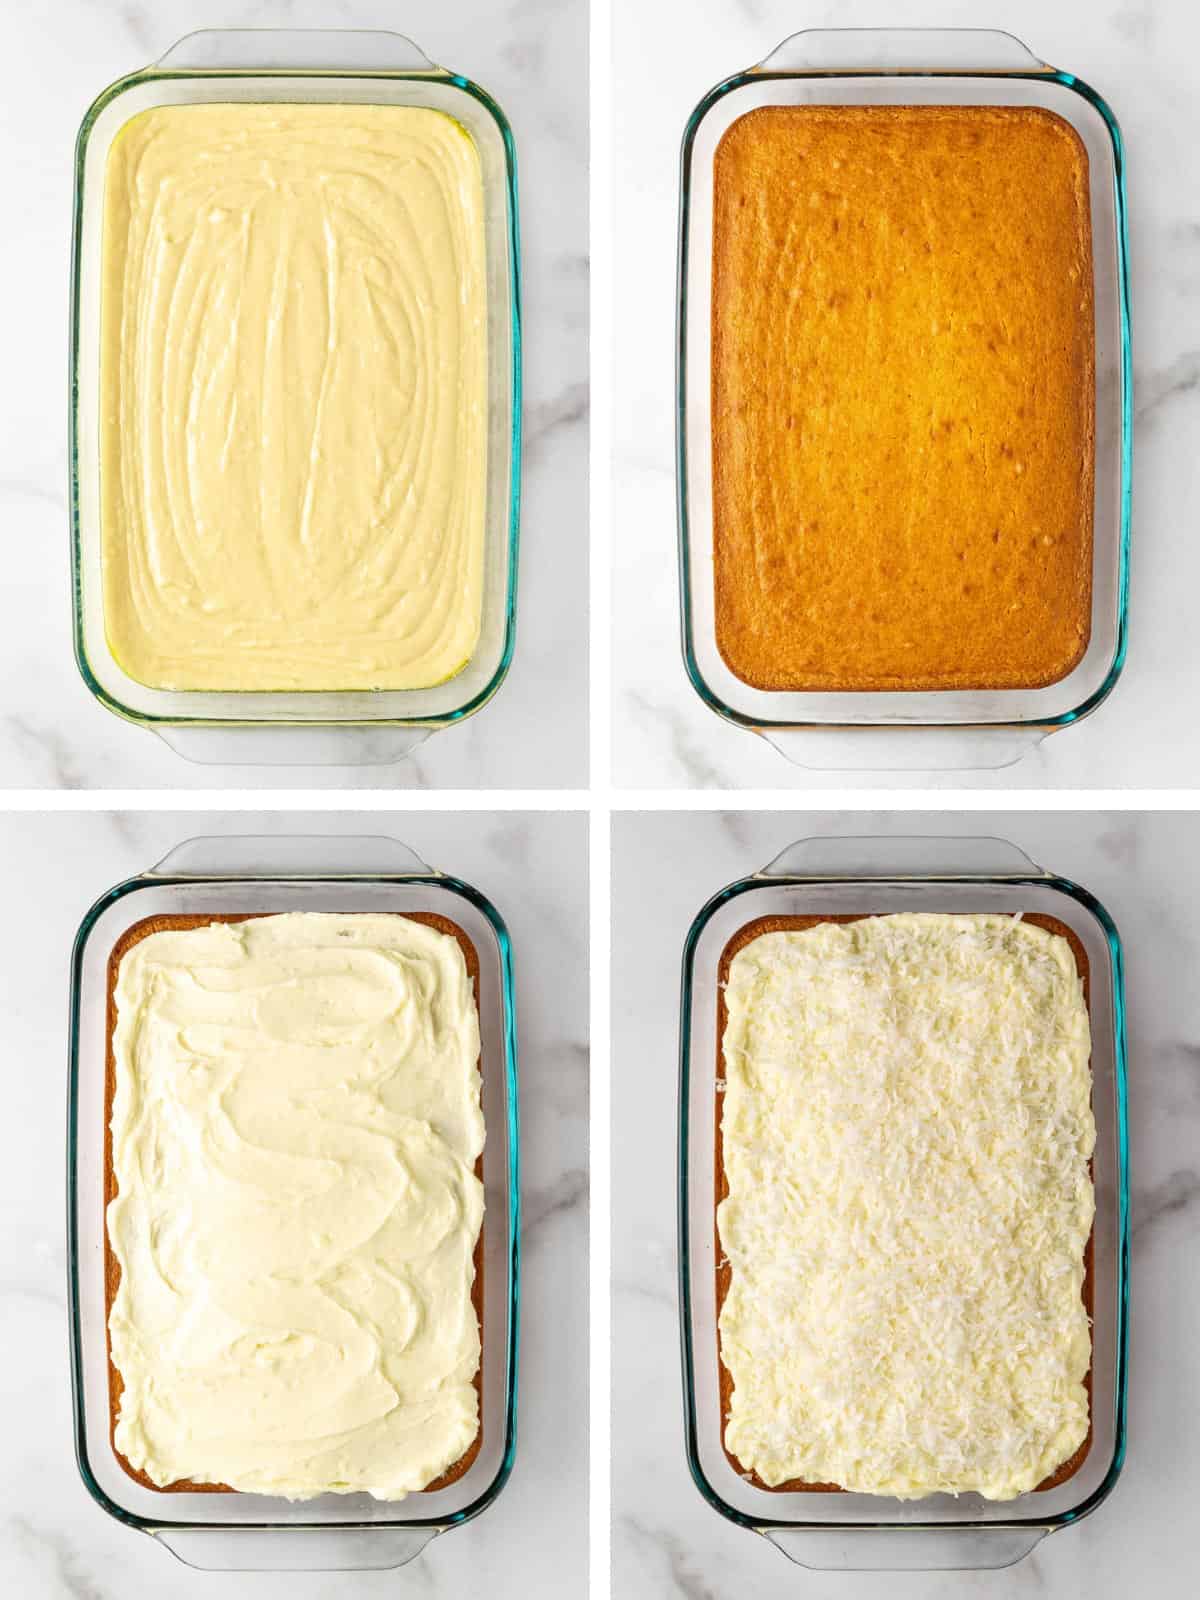 Steps showing how to make an easy coconut sheet cake prepared with a boxed cake mix.